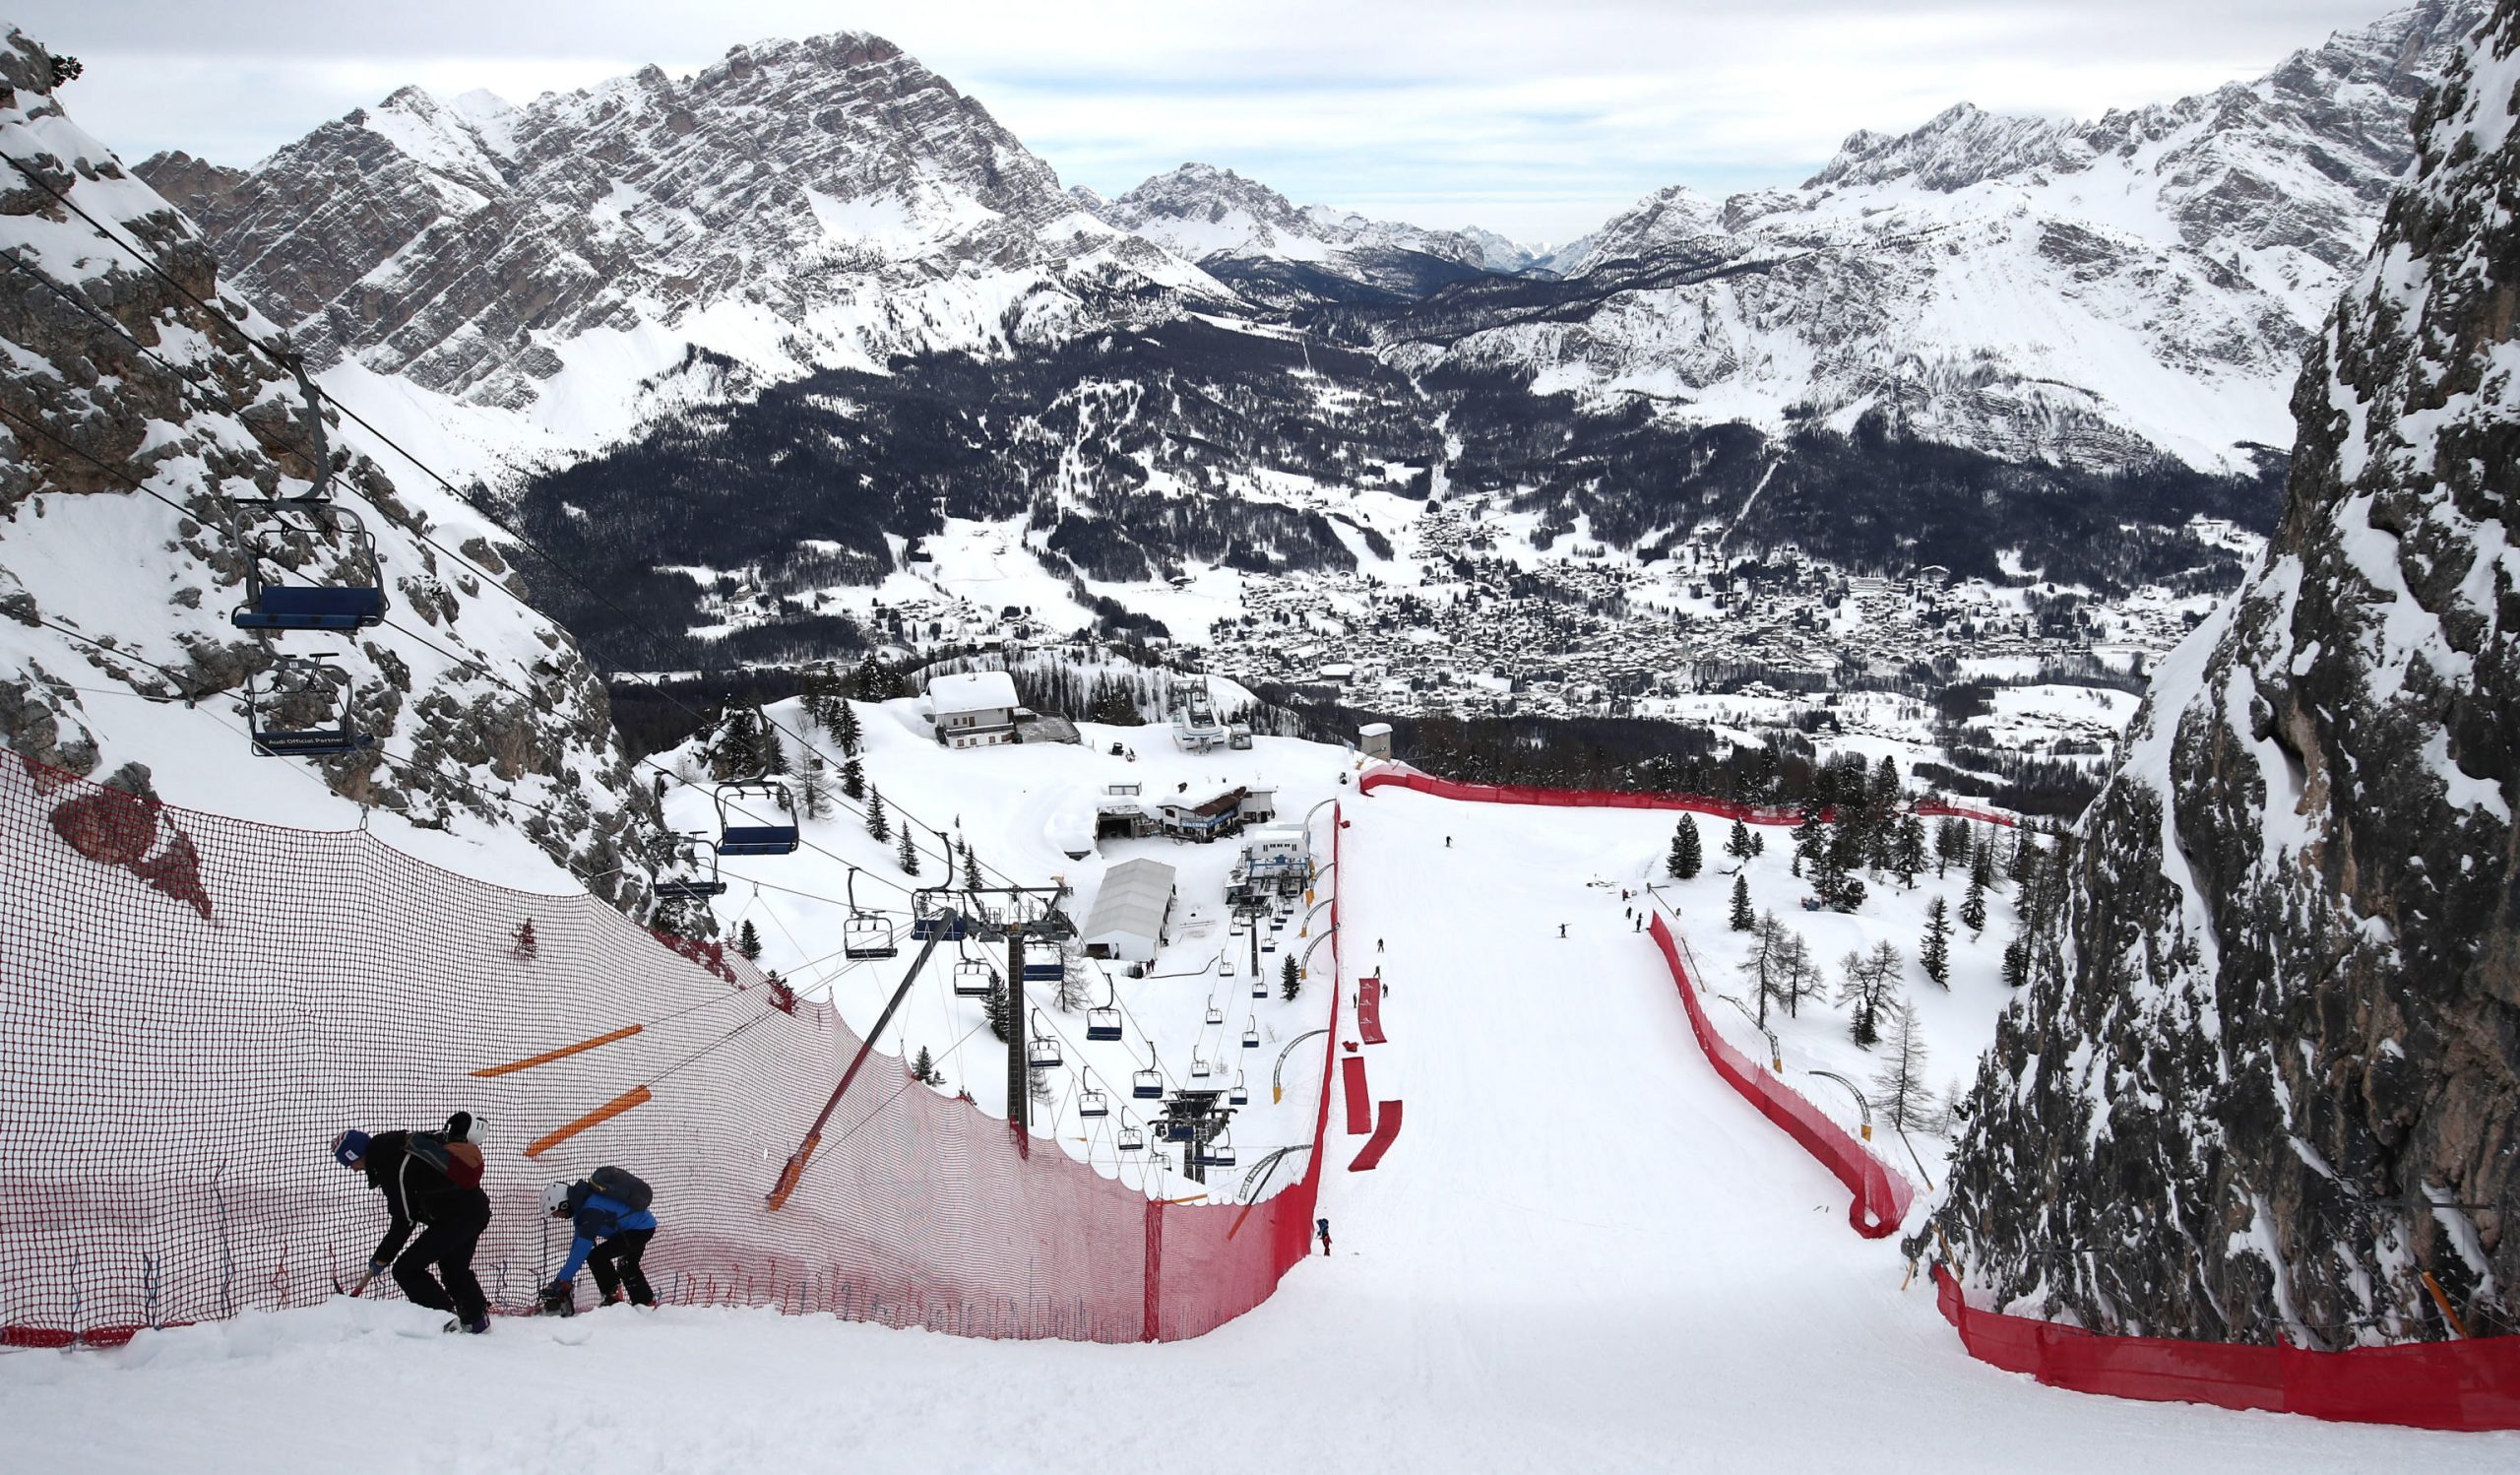 epa08971129 A handout photo made available by the organising committee of the 2021 FIS Alpine World Ski Championships shows preparation works for the Alpine Skiing Championships in Cortina d'Ampezzo, Italy, 27 January 2021 (issued 28 January 2021). The 2021 FIS Alpine World Ski Championships will be held in Cortina d’Ampezzo from 07 to 21 February 2021.  EPA/Fondazione Cortina 2021 / HO  HANDOUT EDITORIAL USE ONLY/NO SALES/NO ARCHIVES